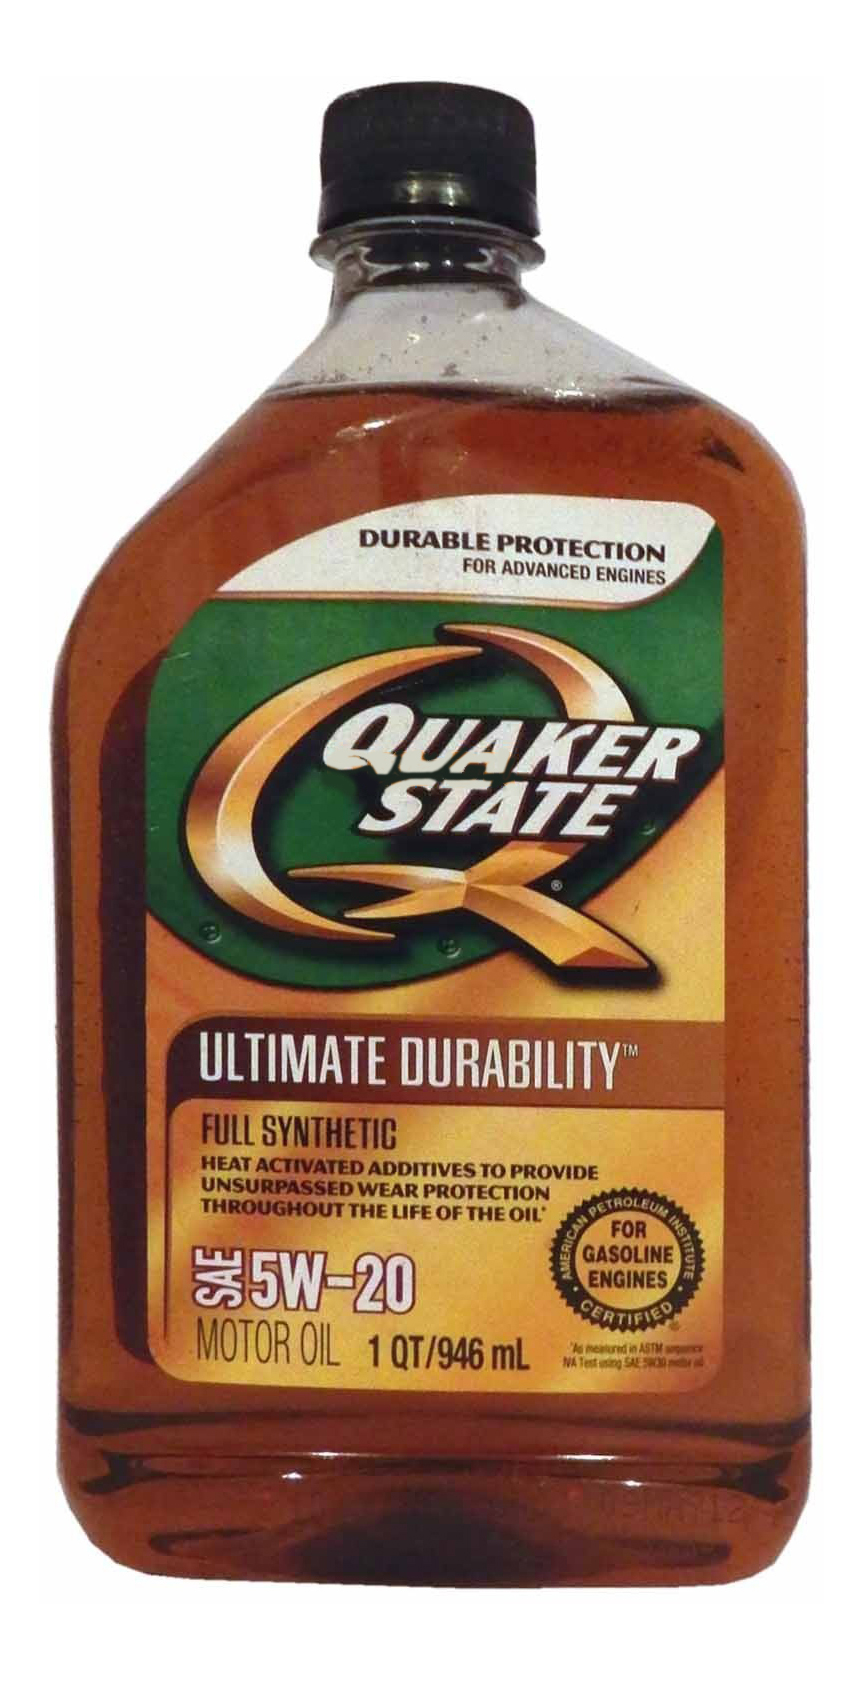 Quaker State Ultimate Durability SAE 5W-20 Full Synthetic Motor Oil